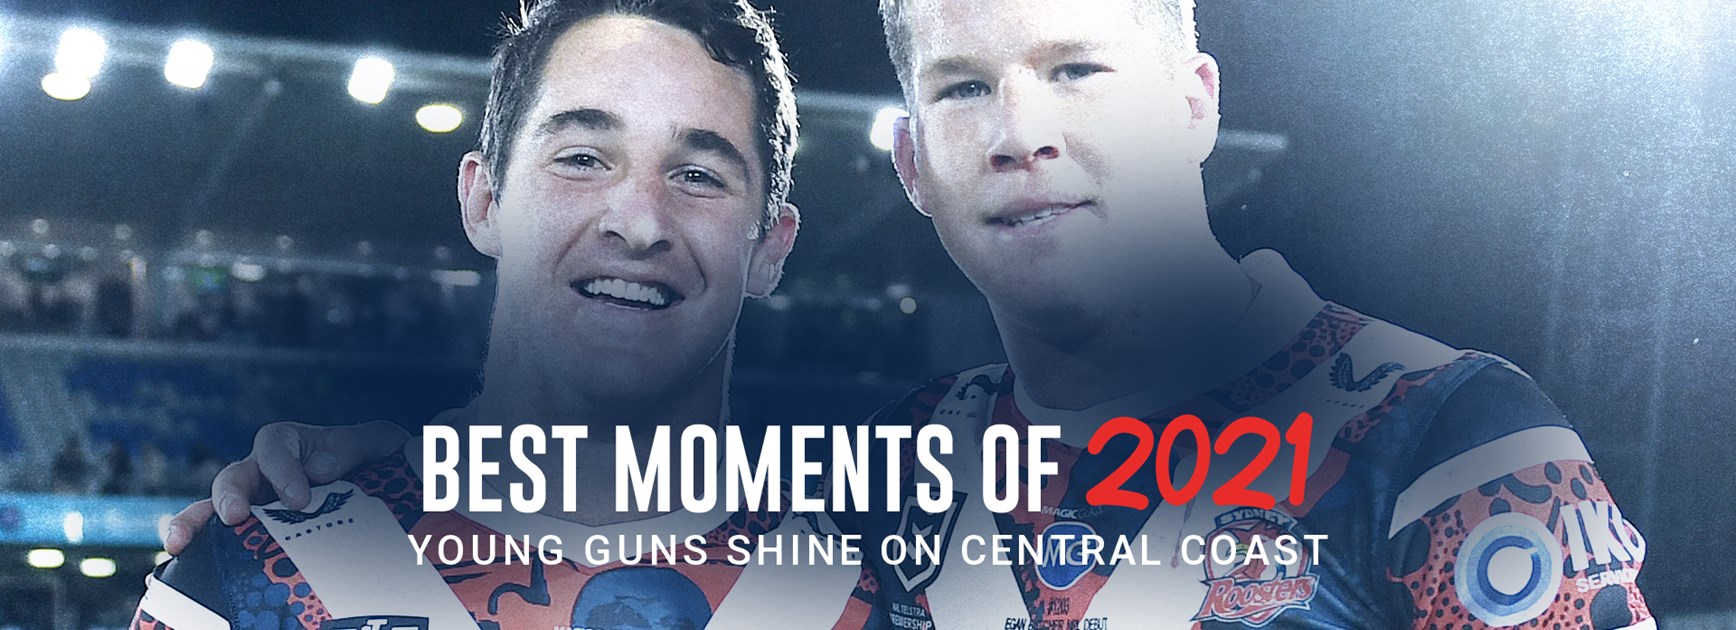 Best Moments of 2021: Young Guns Shine on Central Coast